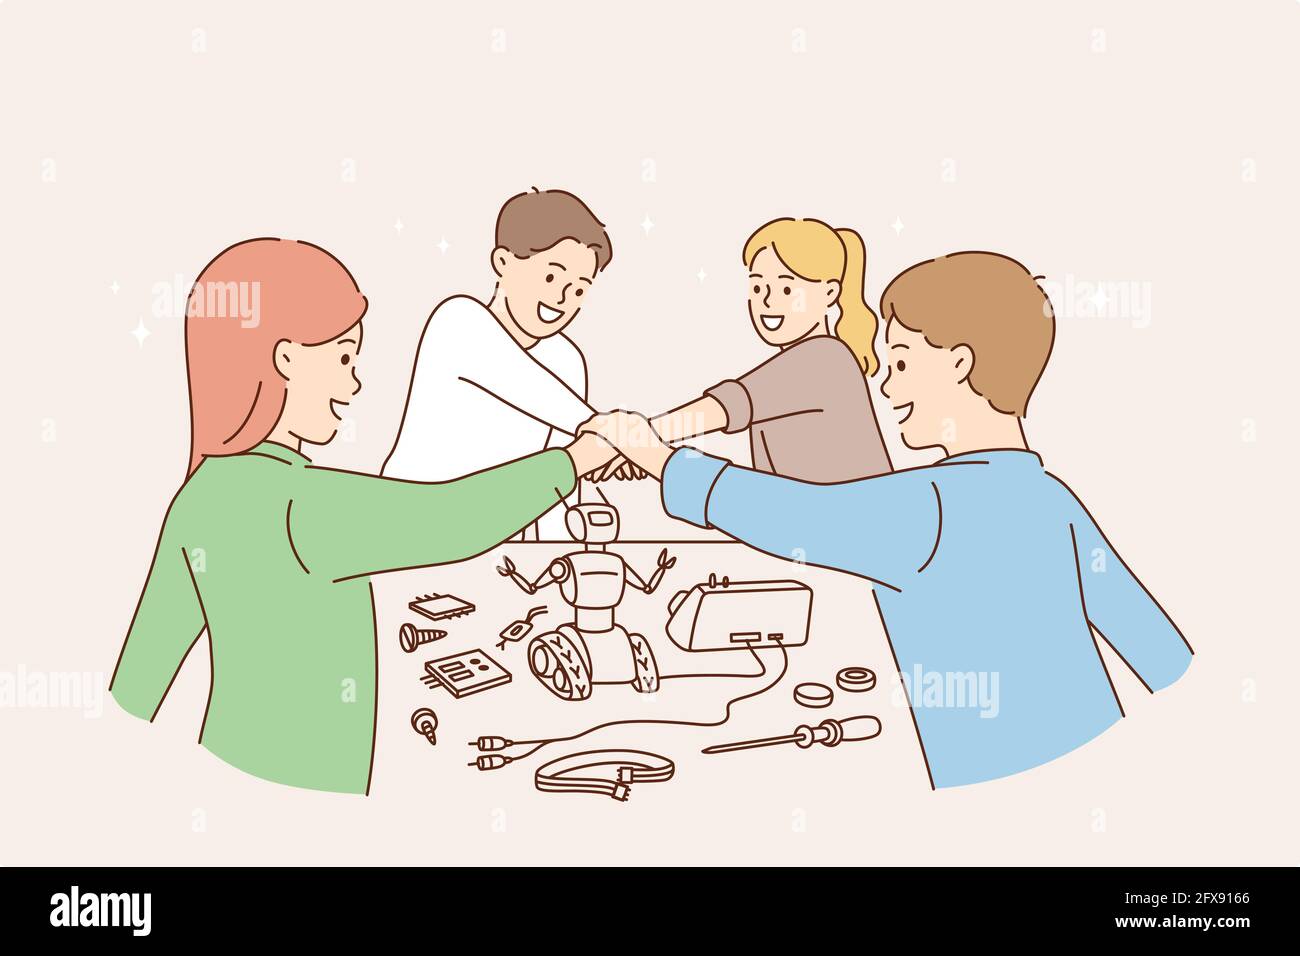 Happy children and games concept. Group of children friends cartoon characters playing together as team with robot shaking hands as union vector illustration  Stock Vector